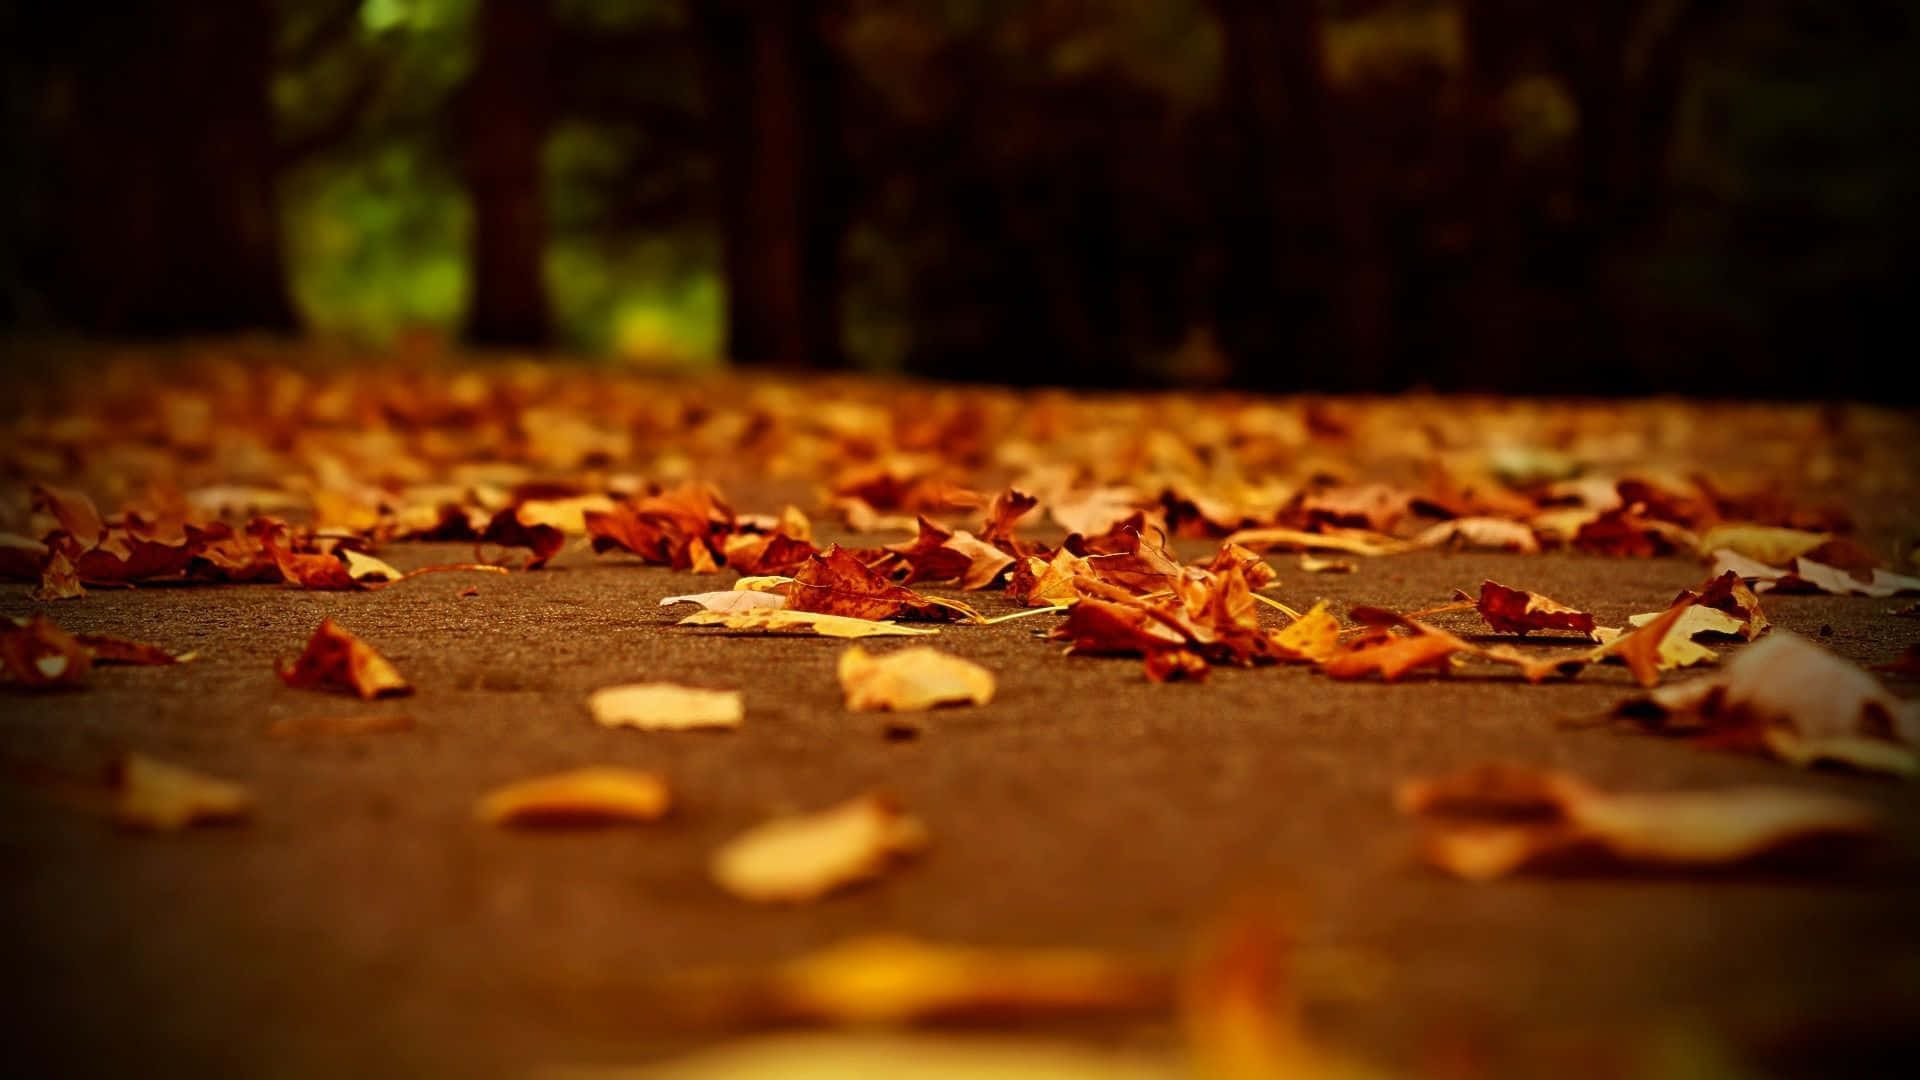 Autumn Leaves On The Ground Wallpaper